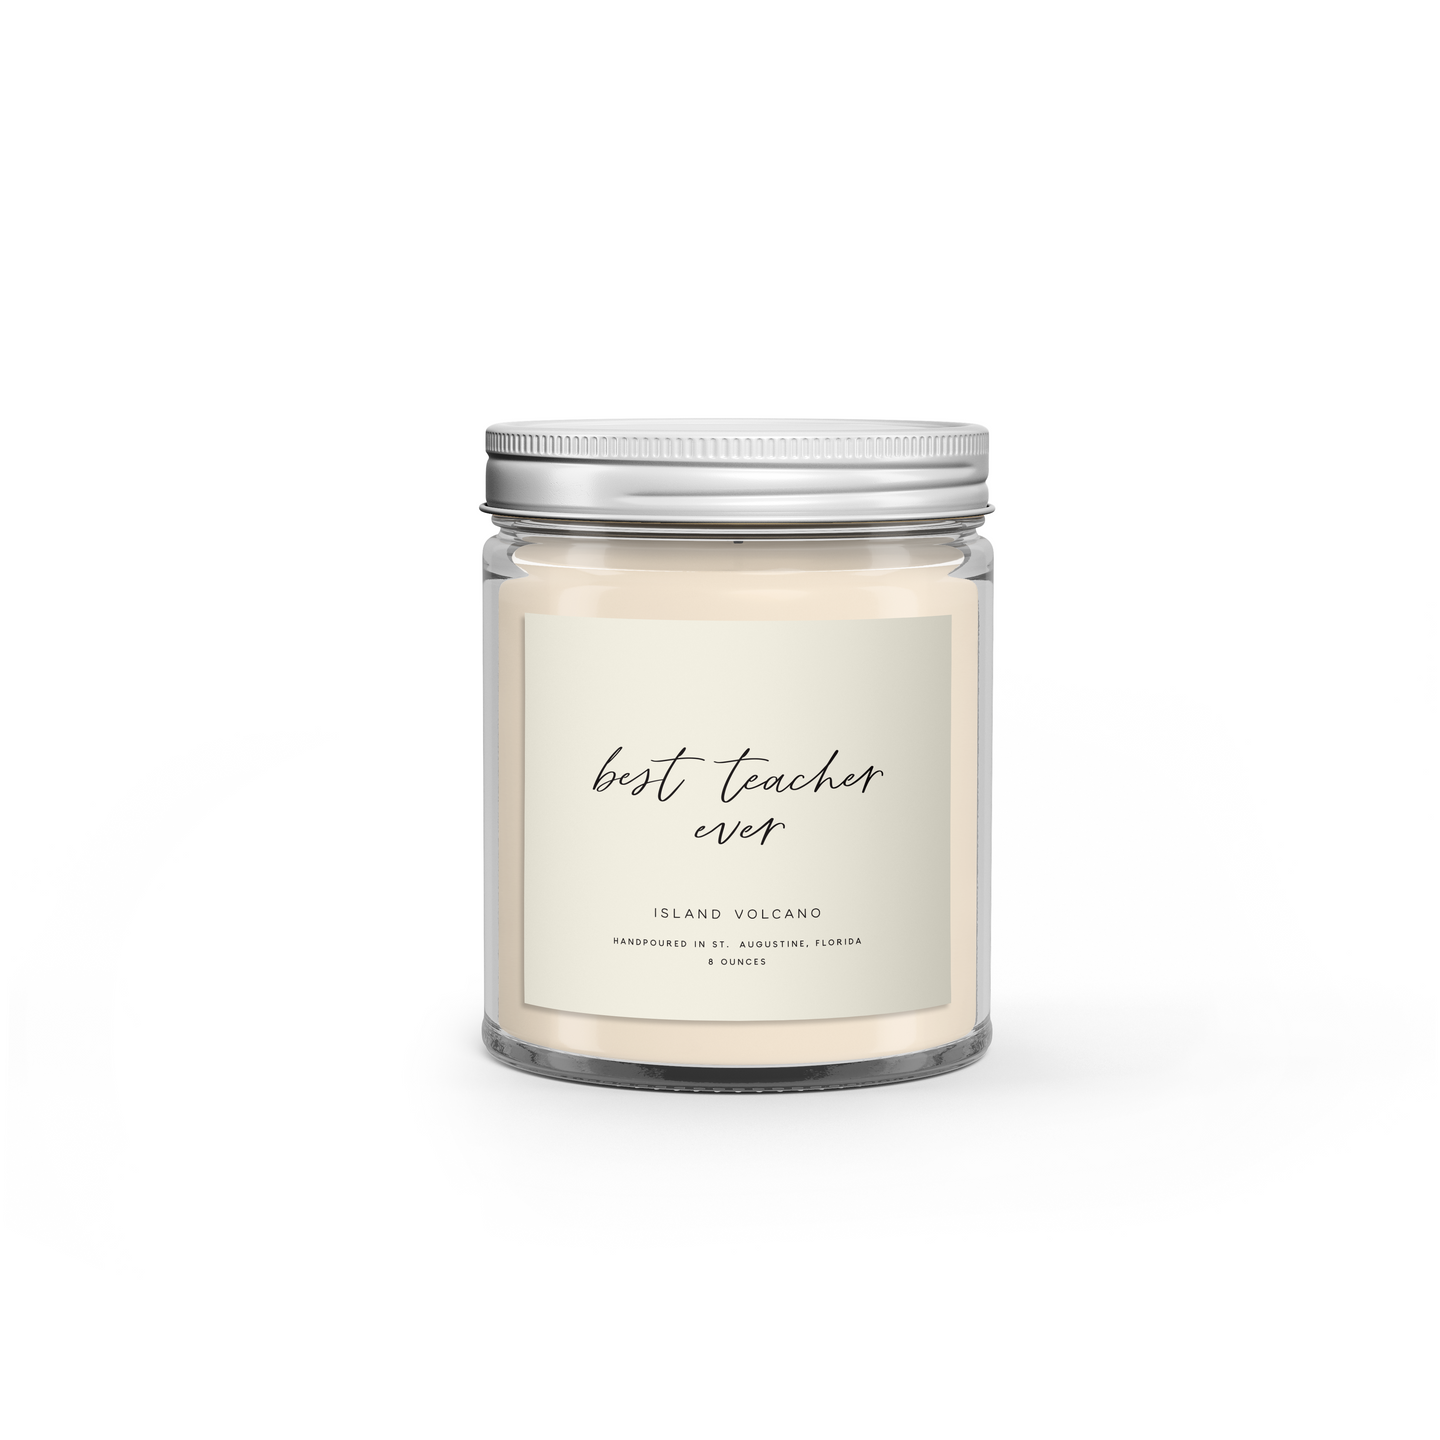 Best Teacher Ever: 8 oz Soy Wax Hand-Poured Candle